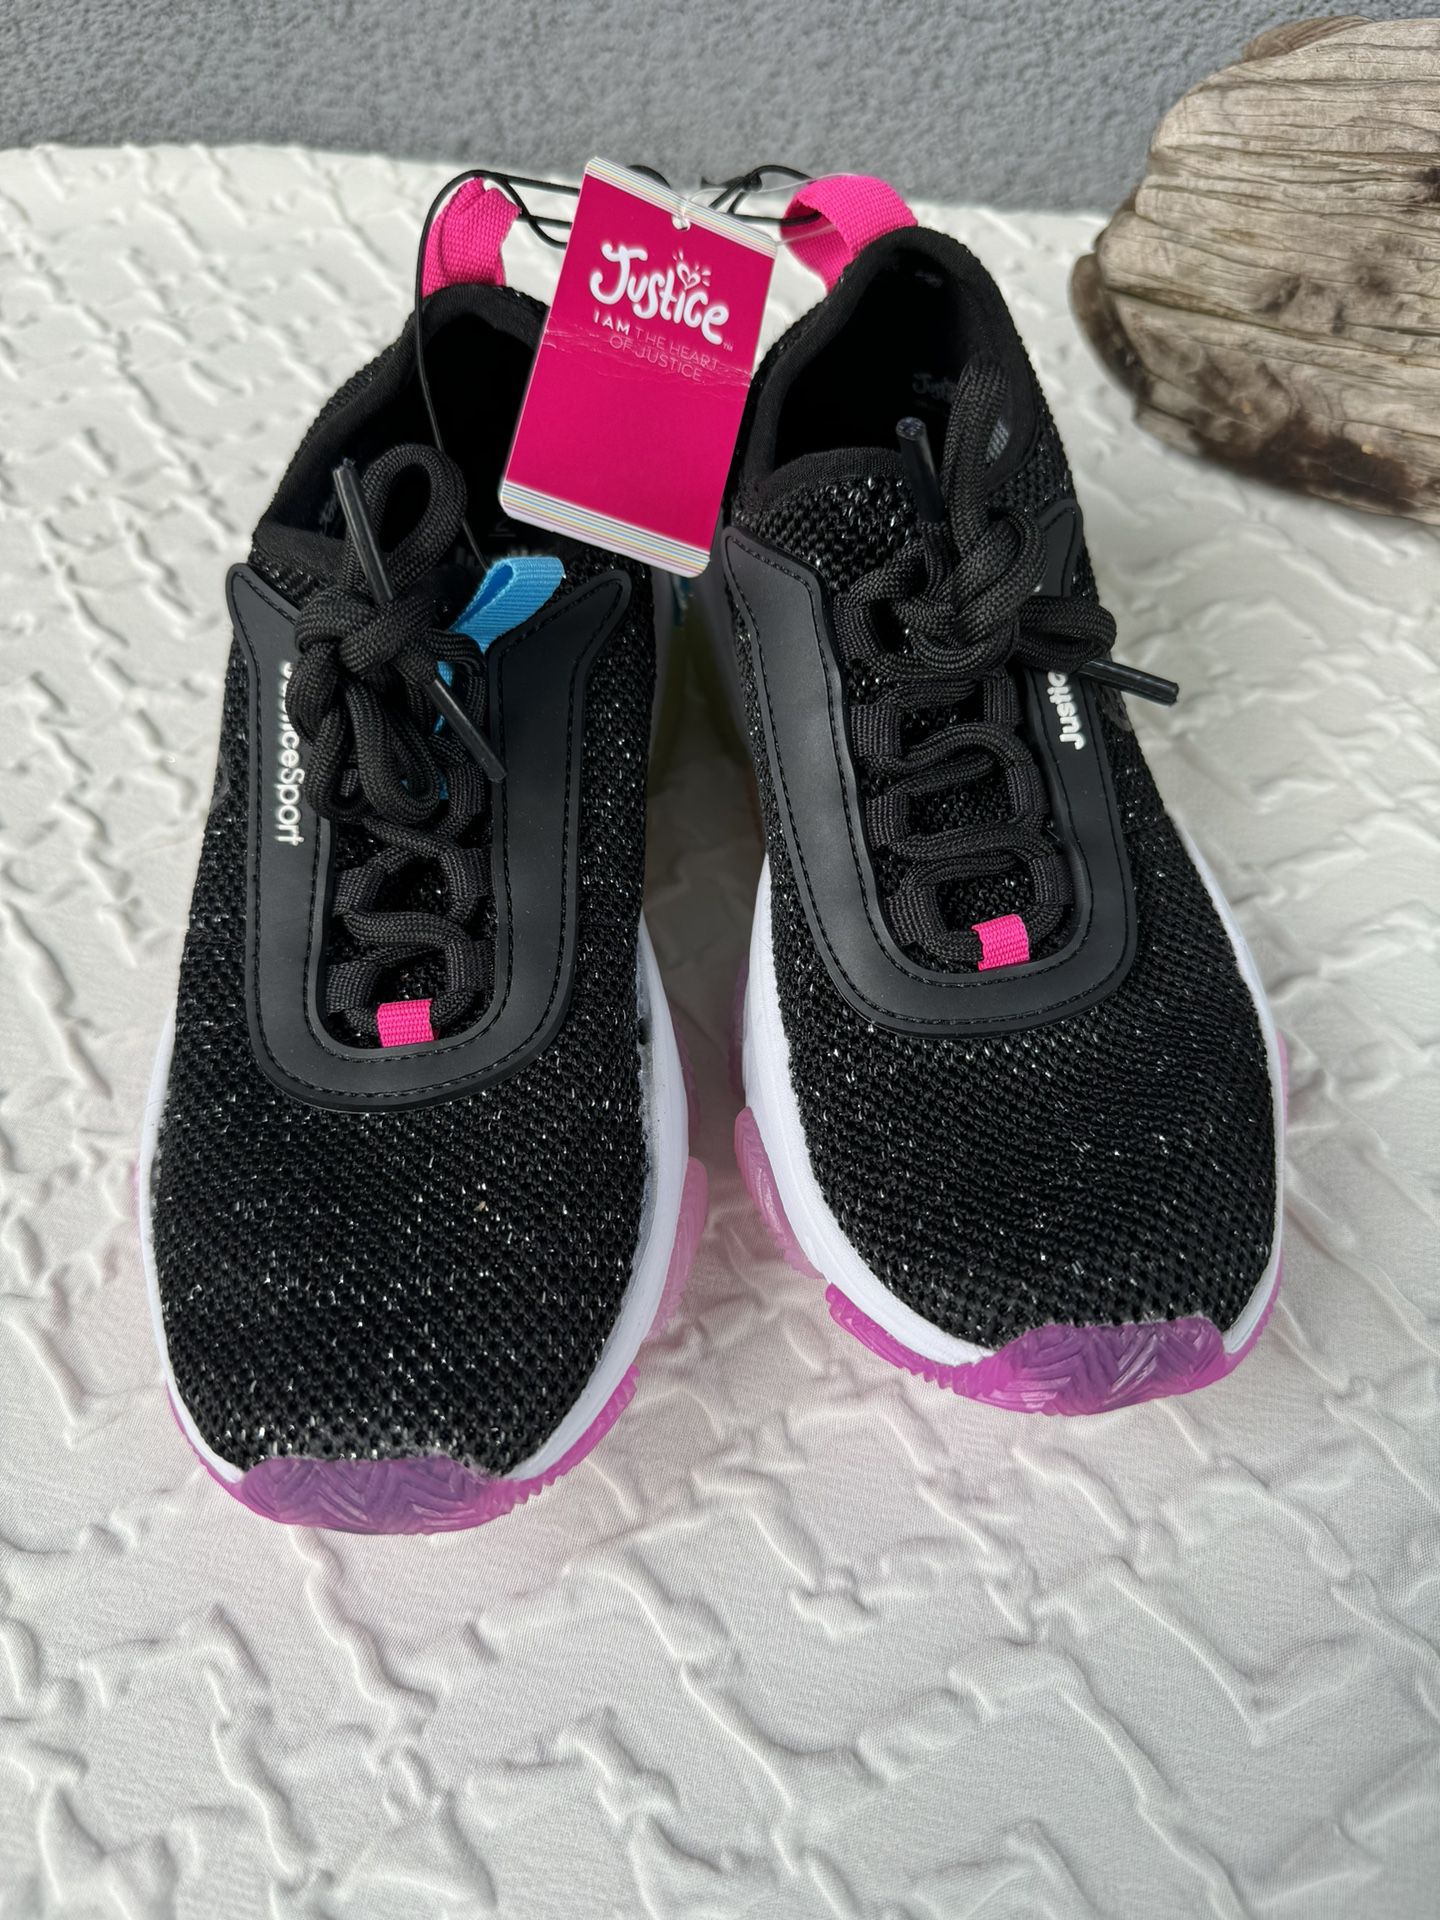 New Justice Young Girls Shoes Size 2